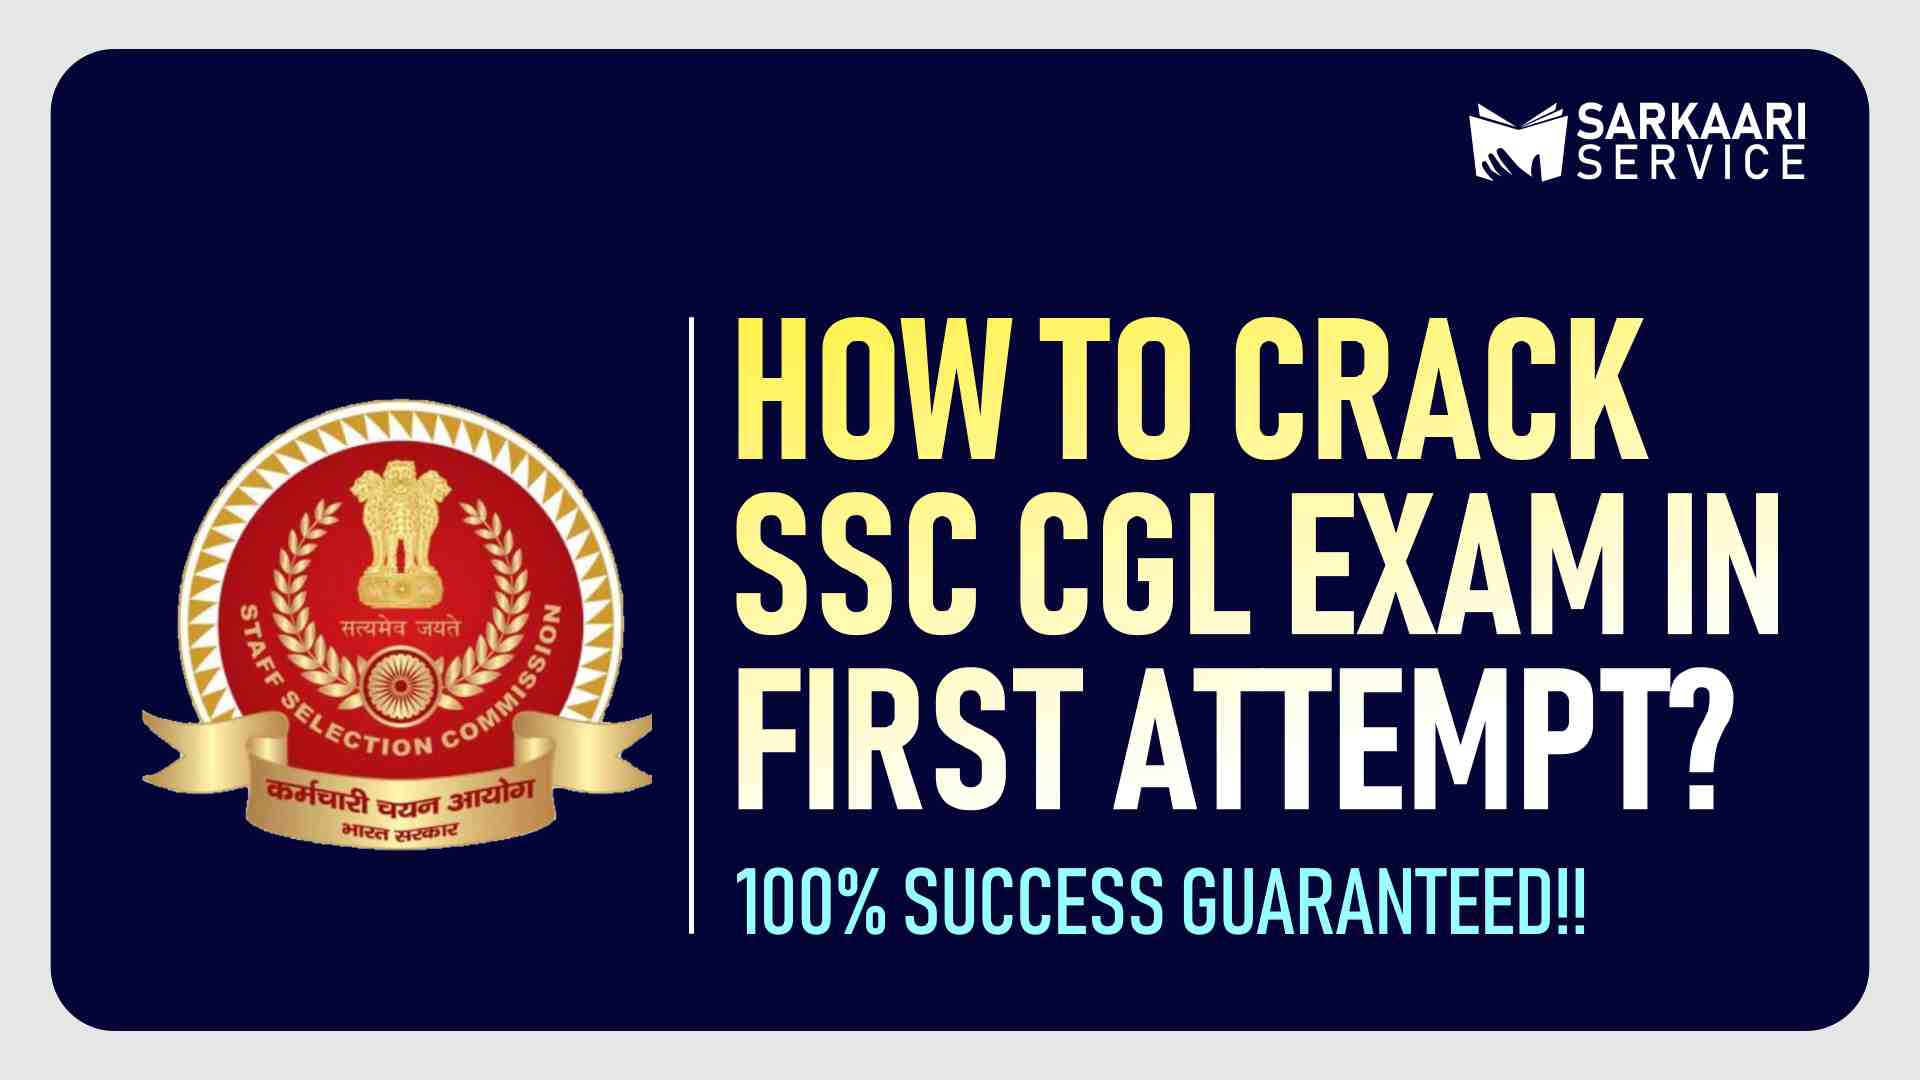 How to Crack SSC CGL 2020 in First Attempt? | Sarkaari Service